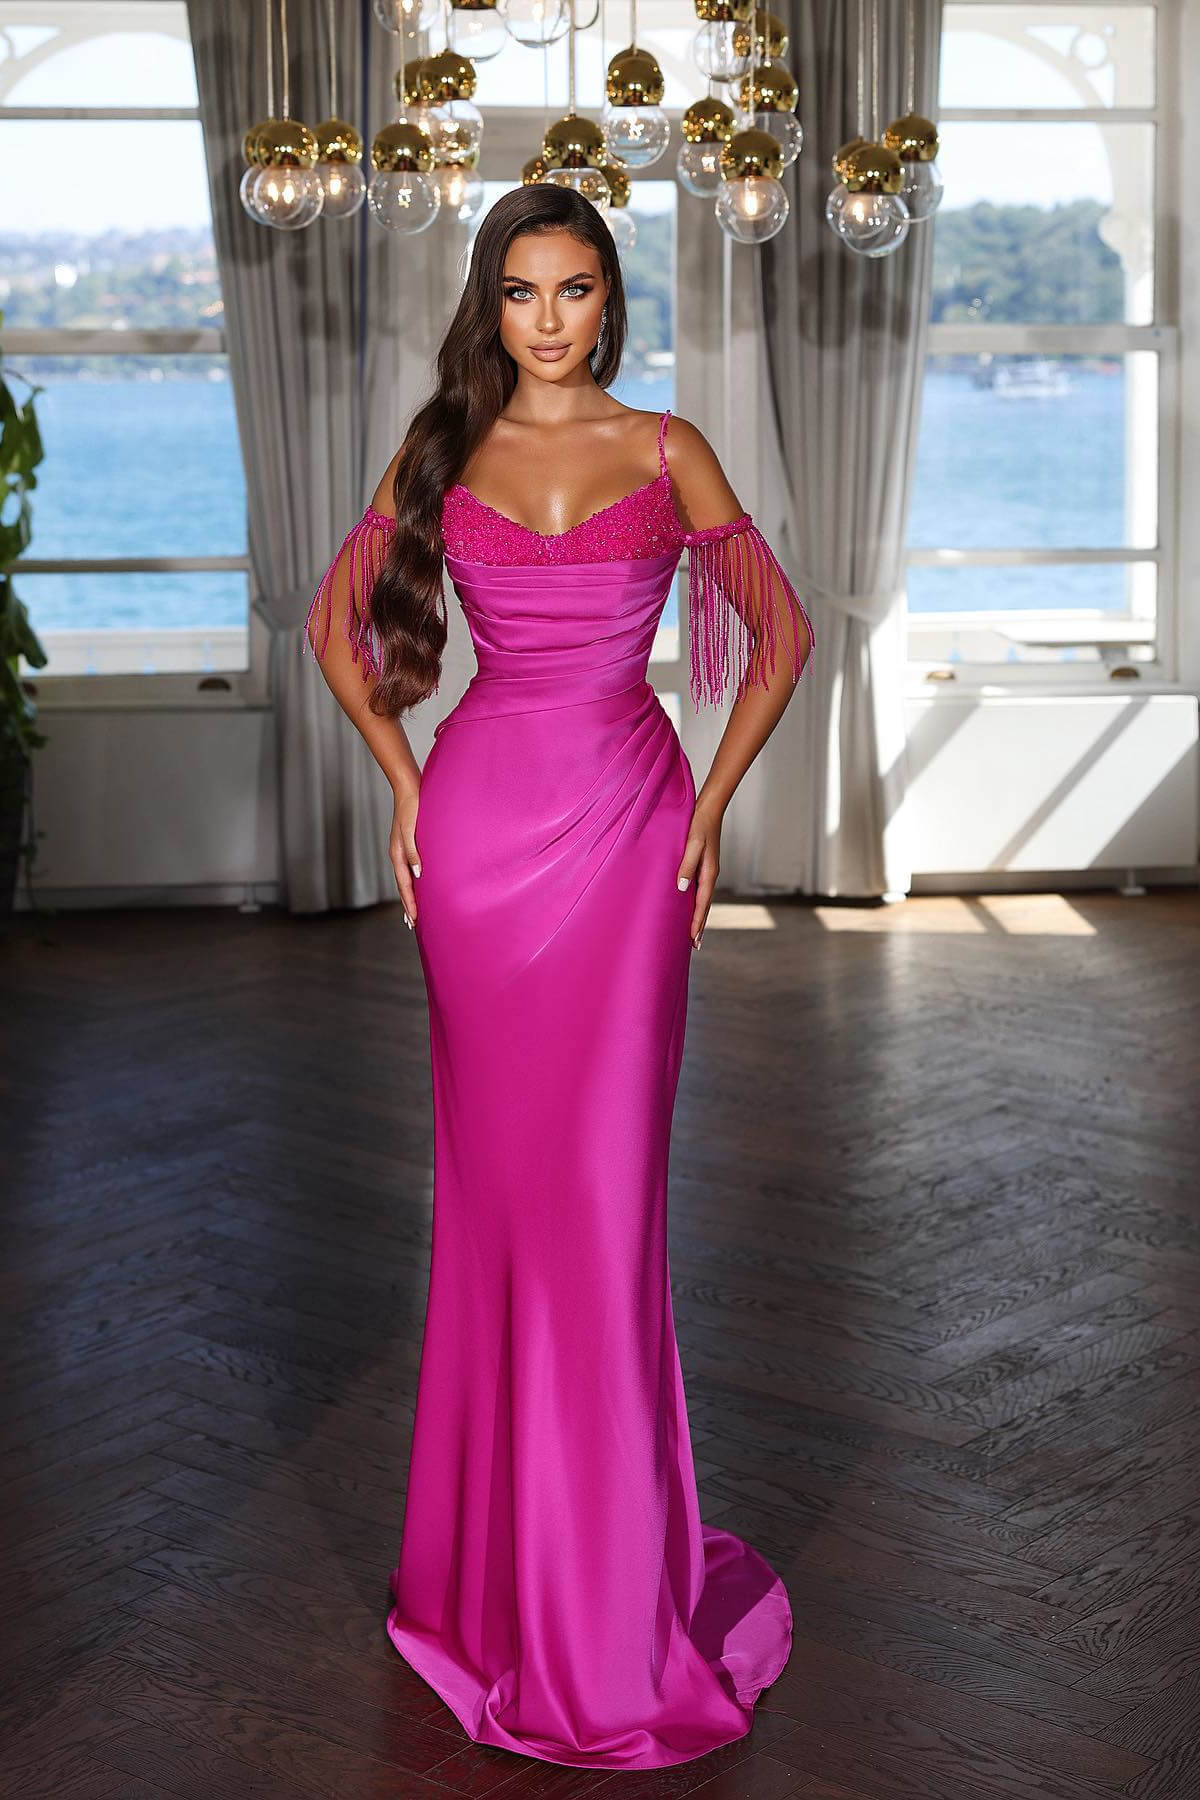 Bellasprom Hot Pink Long Mermaid Prom Dress Spaghetti-STraps With Sequins Tassels Bellasprom